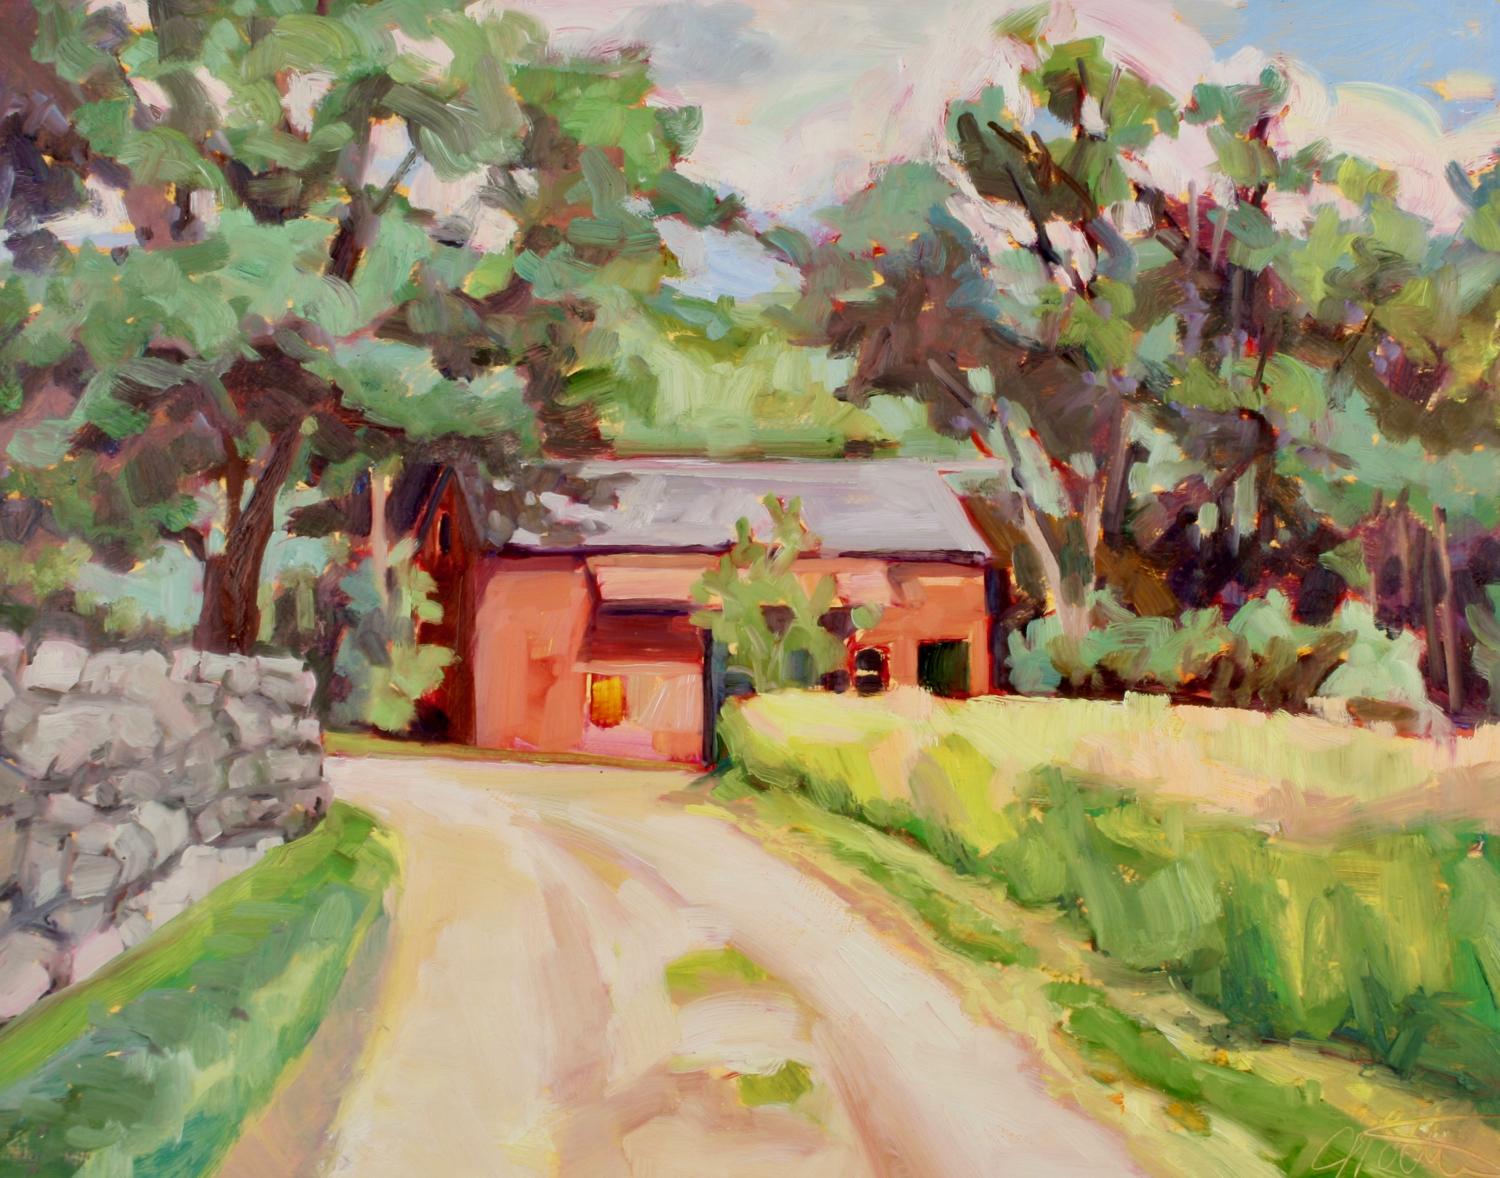 "Russell's Barn", landscape, nature, high chroma, vibrant, oil painting - Painting by Jill Pottle